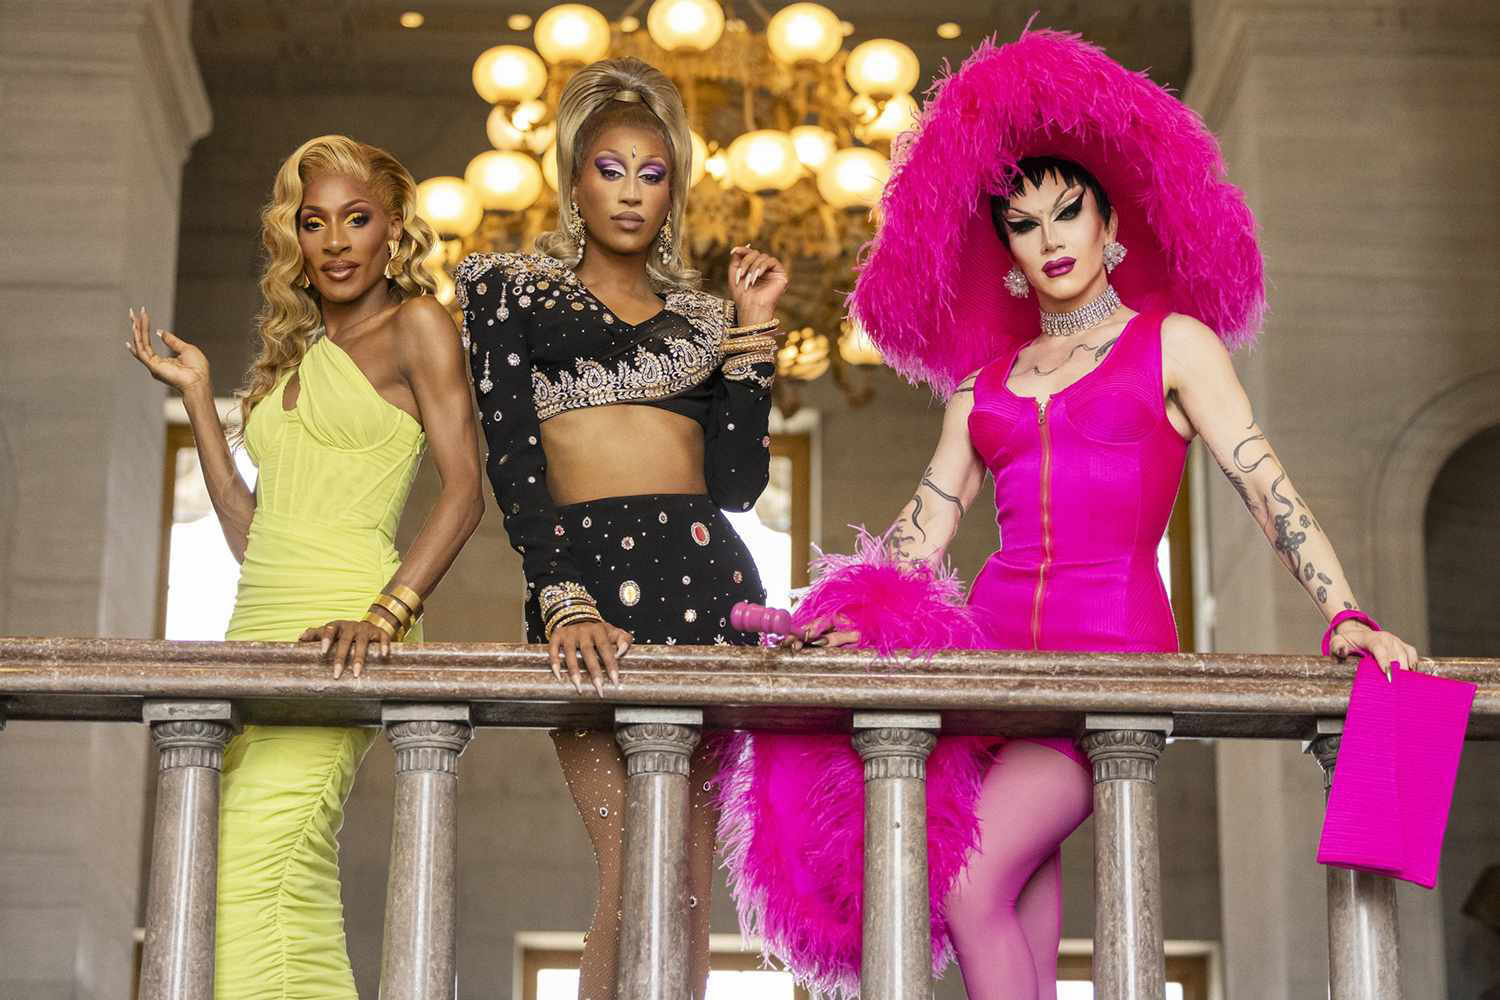 “Drag Race” stars face arrest threats, 'religious cult' accusations in ...